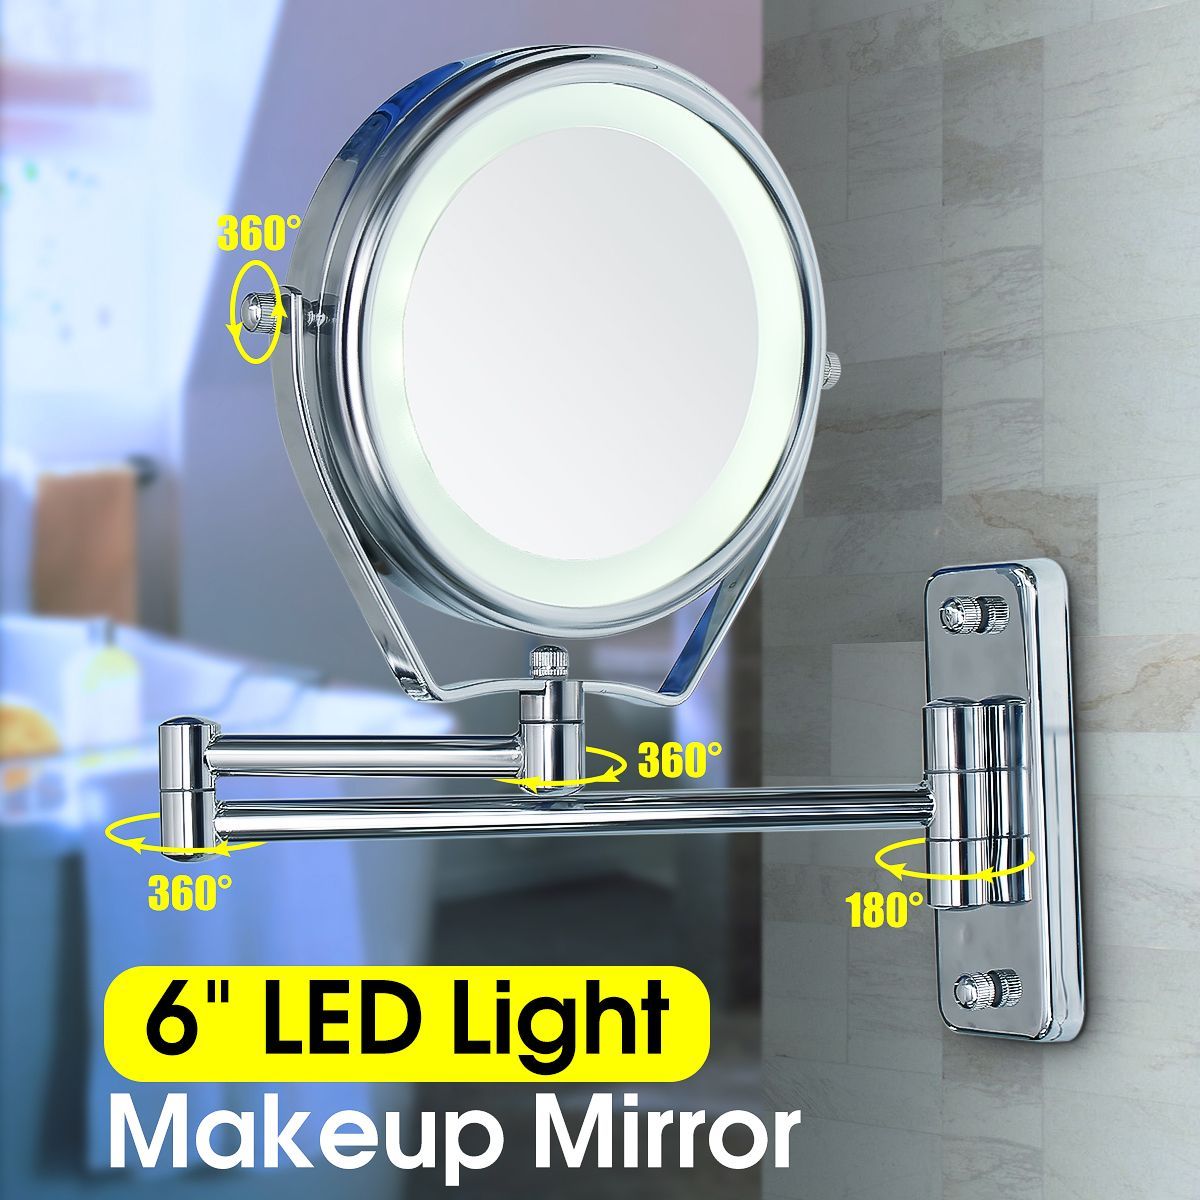 7x-Magnification-LED-Makeup-Mirror-Cosmetic-Double-sided-Vanity-6quot-Mirrors-1590132